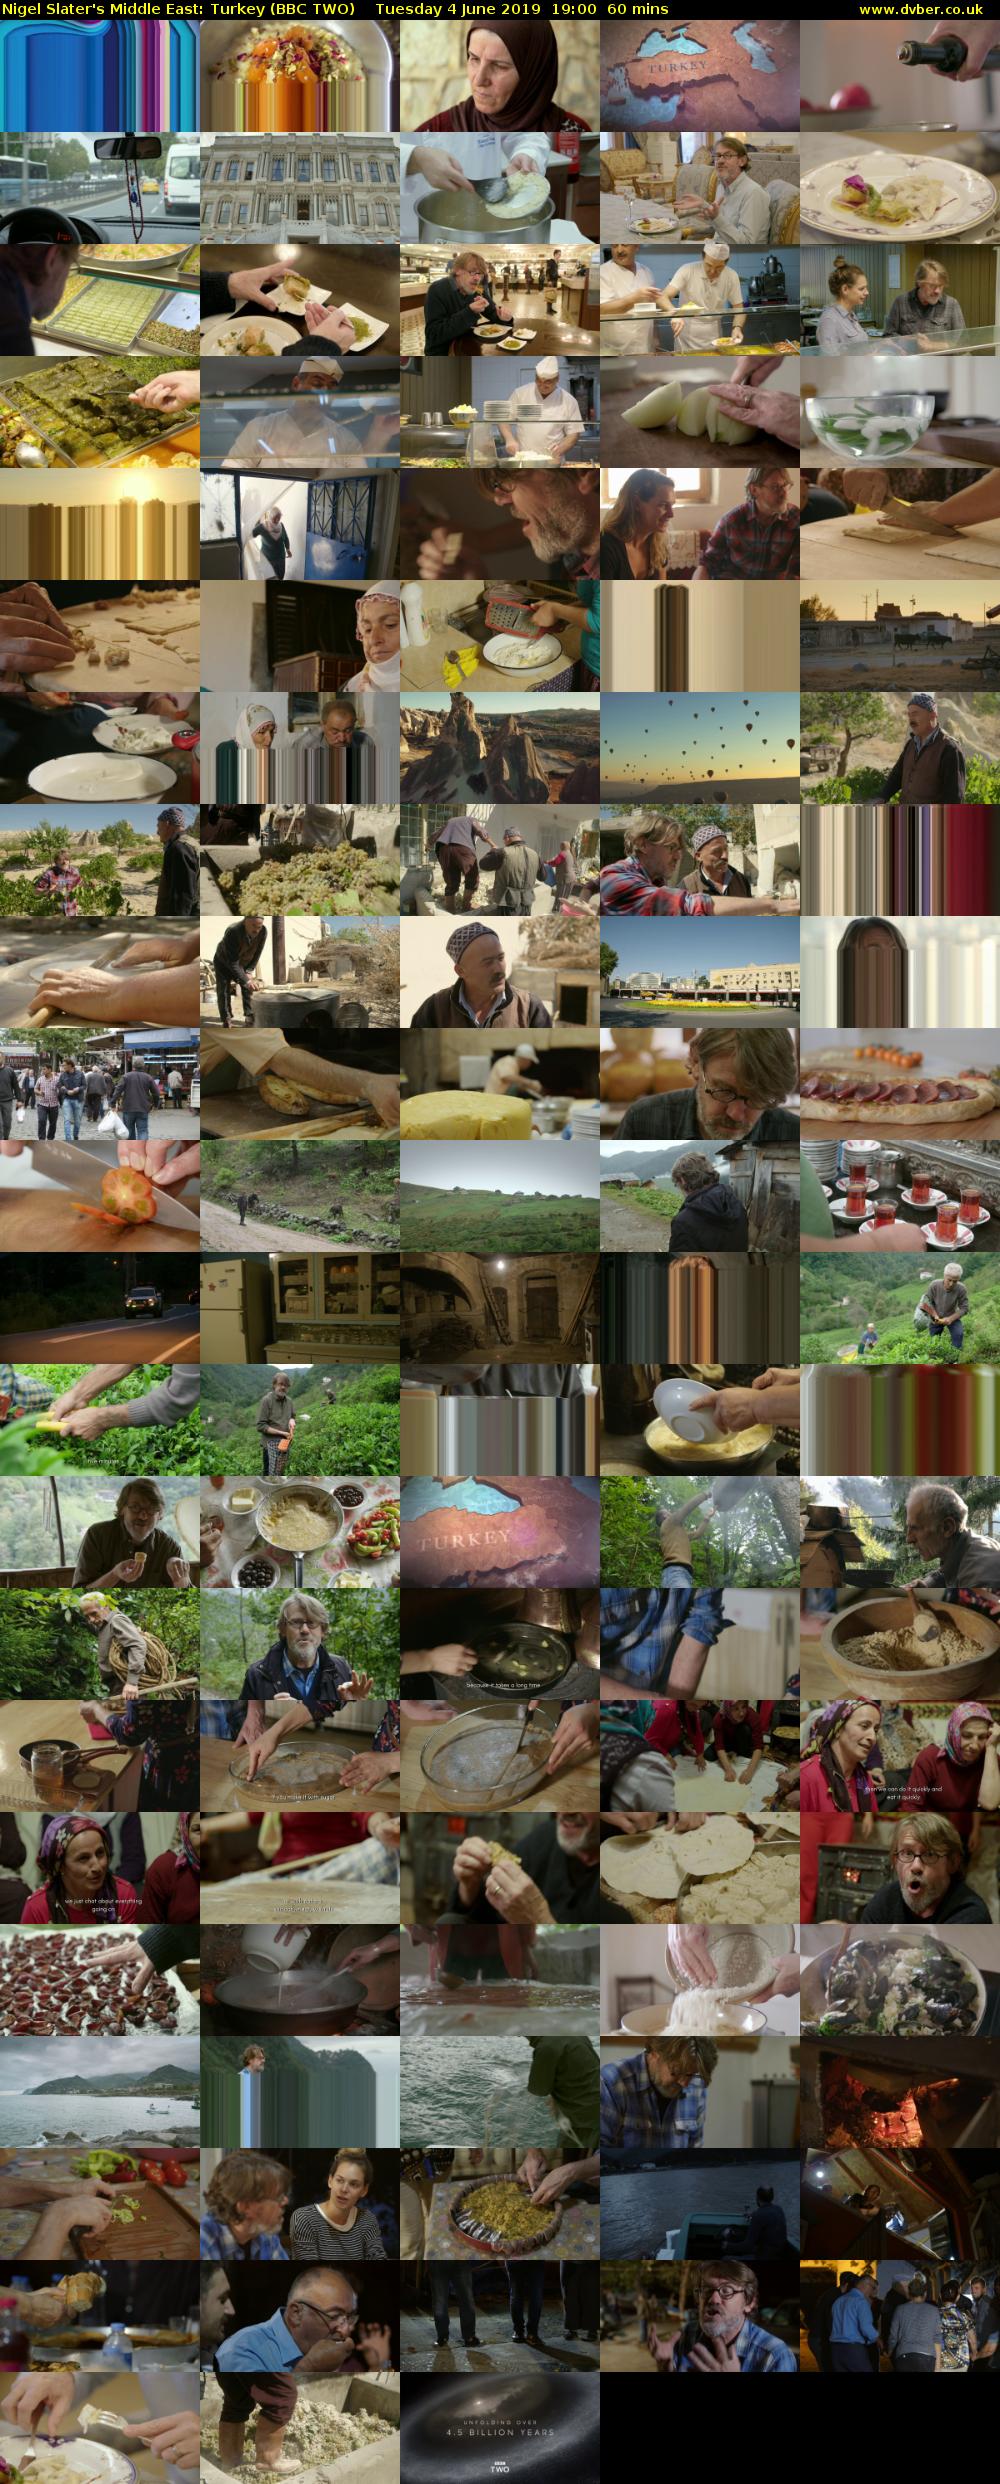 Nigel Slater's Middle East: Turkey (BBC TWO) Tuesday 4 June 2019 19:00 - 20:00